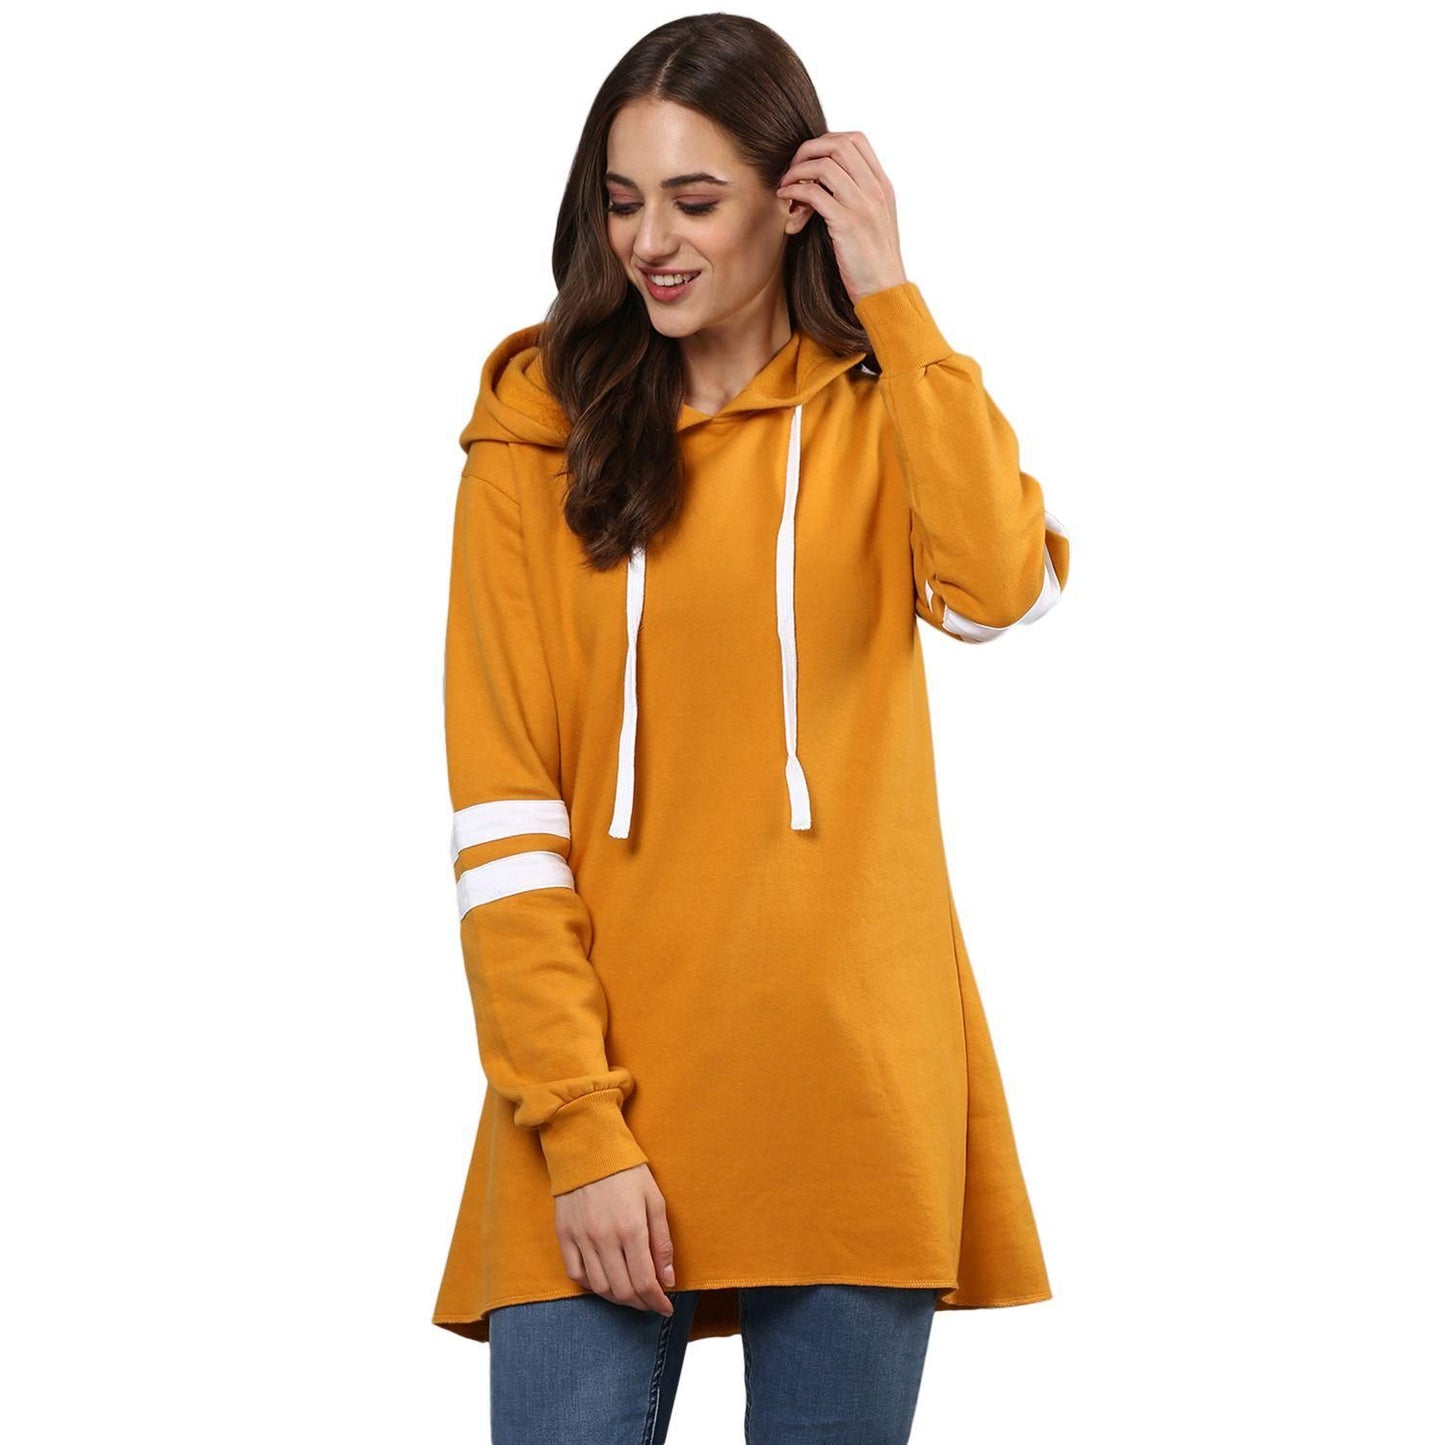 Campus Sutra Women's Solid Stylish A-Line Casual Winter Sweatshirts